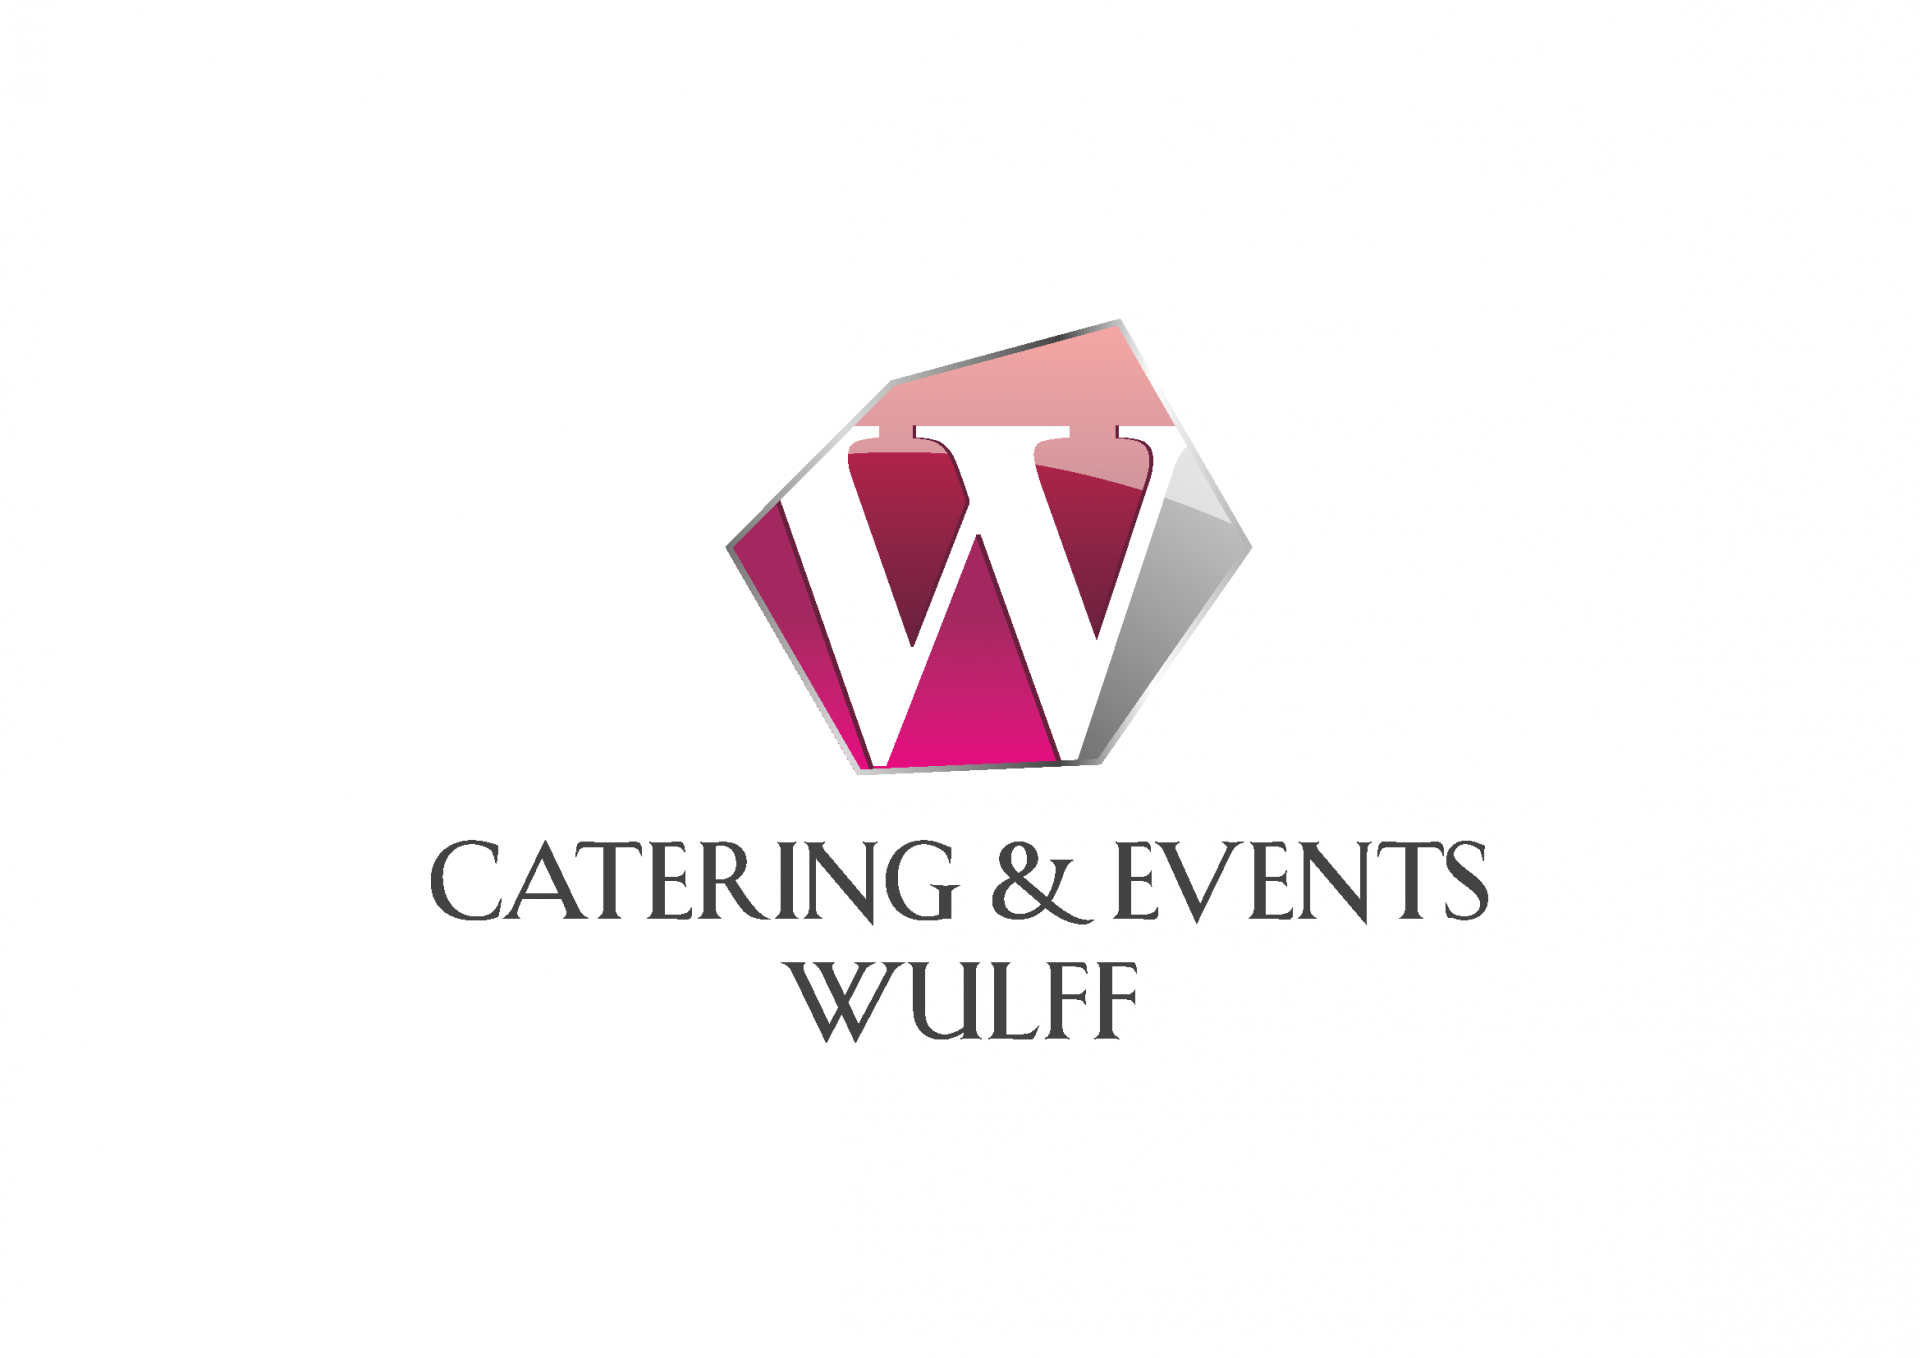 Wulff Catering